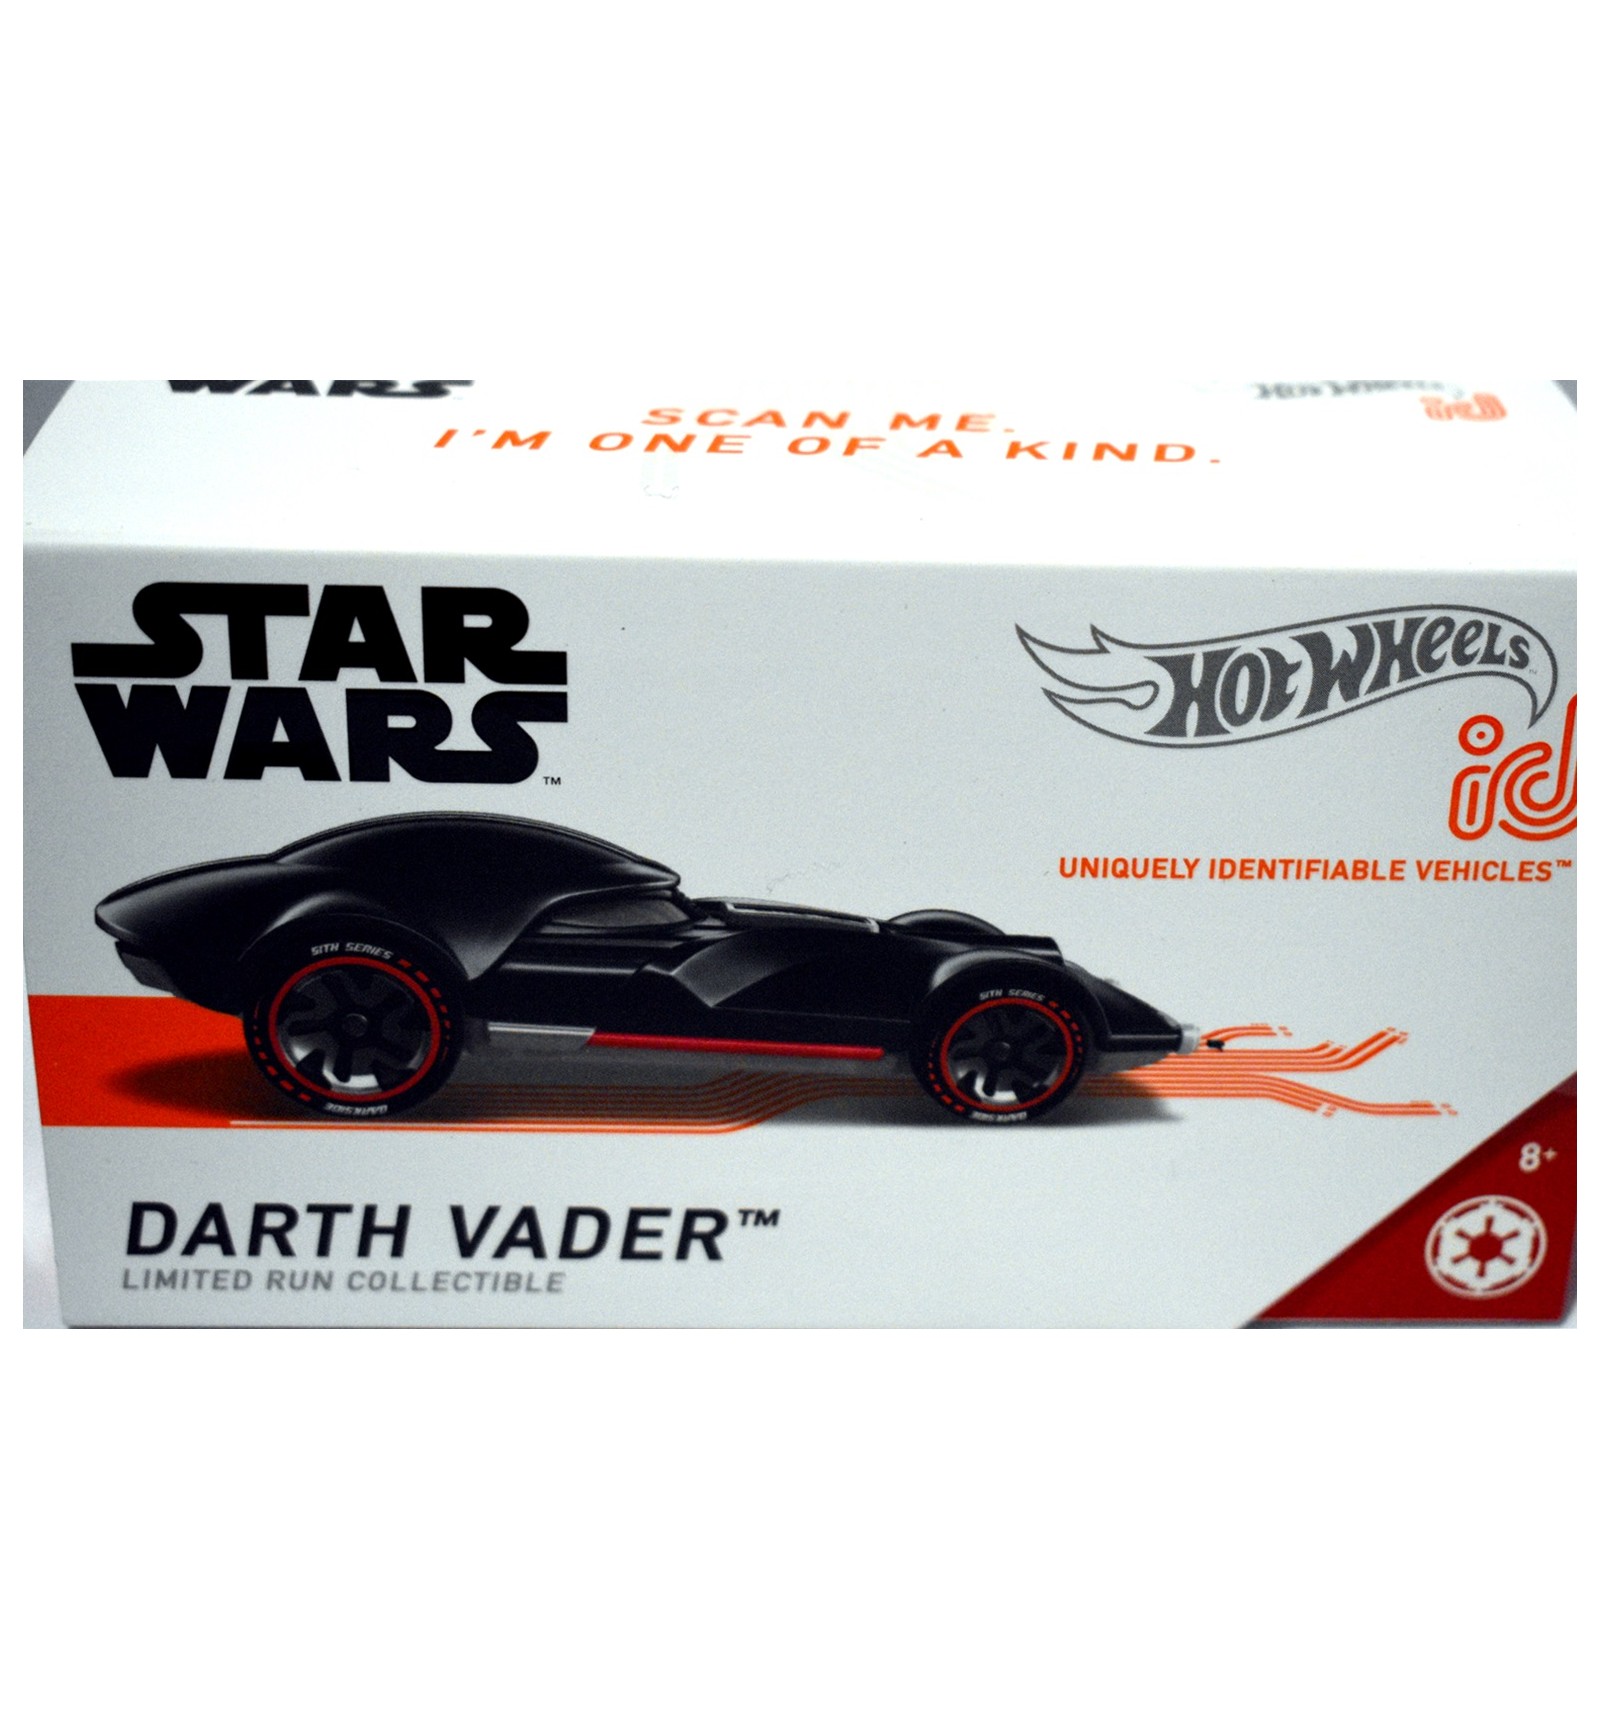 Hot Wheels Star Wars Darth Vader Clearance, 56% OFF | empow-her.com